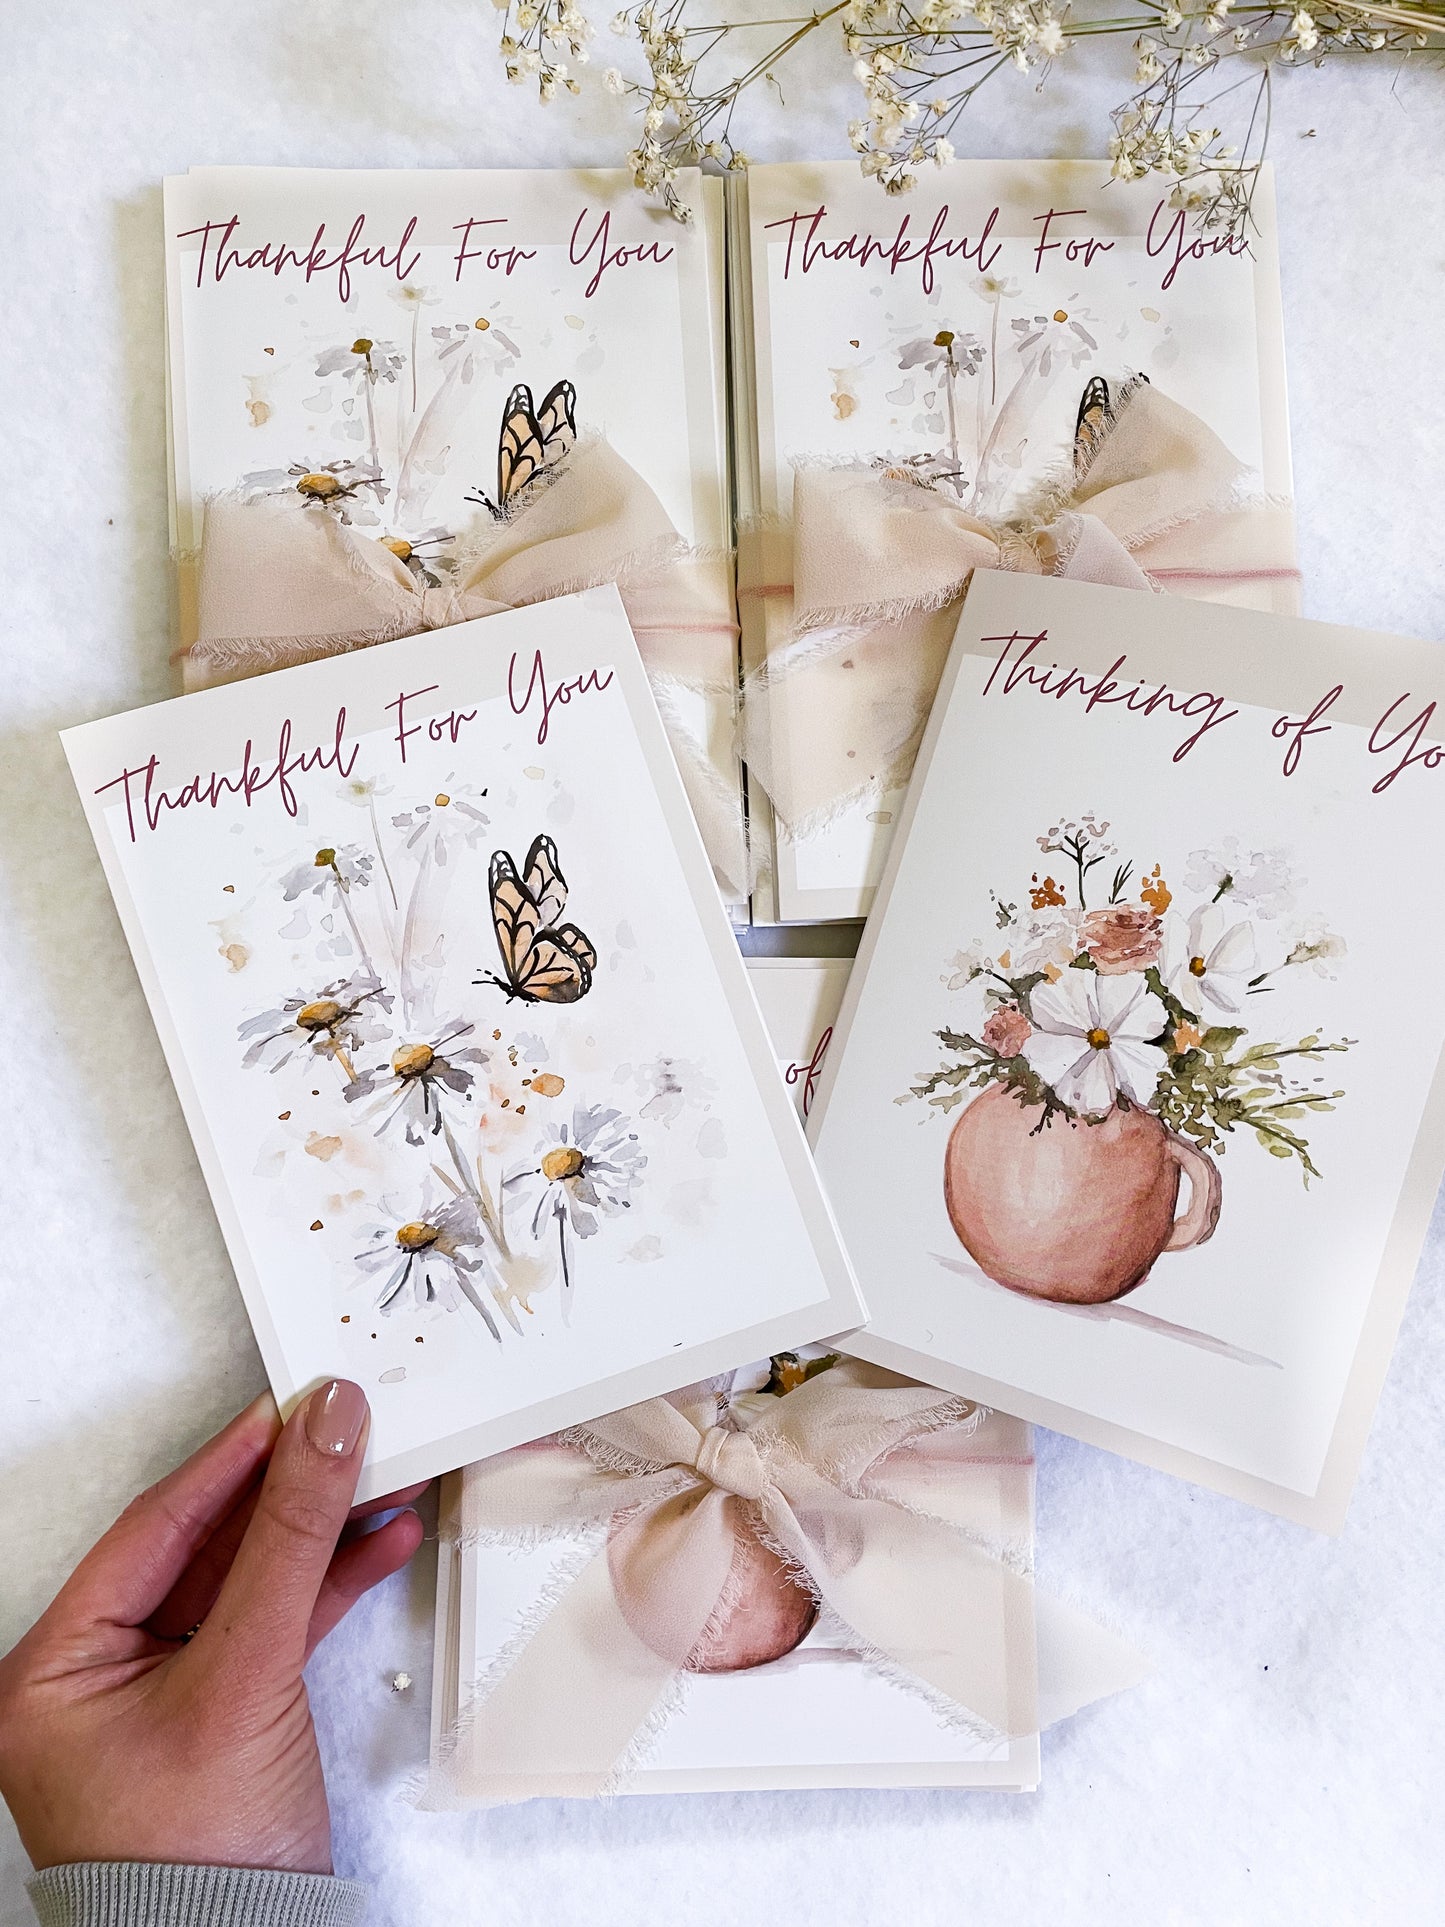 Butterfly Notecards